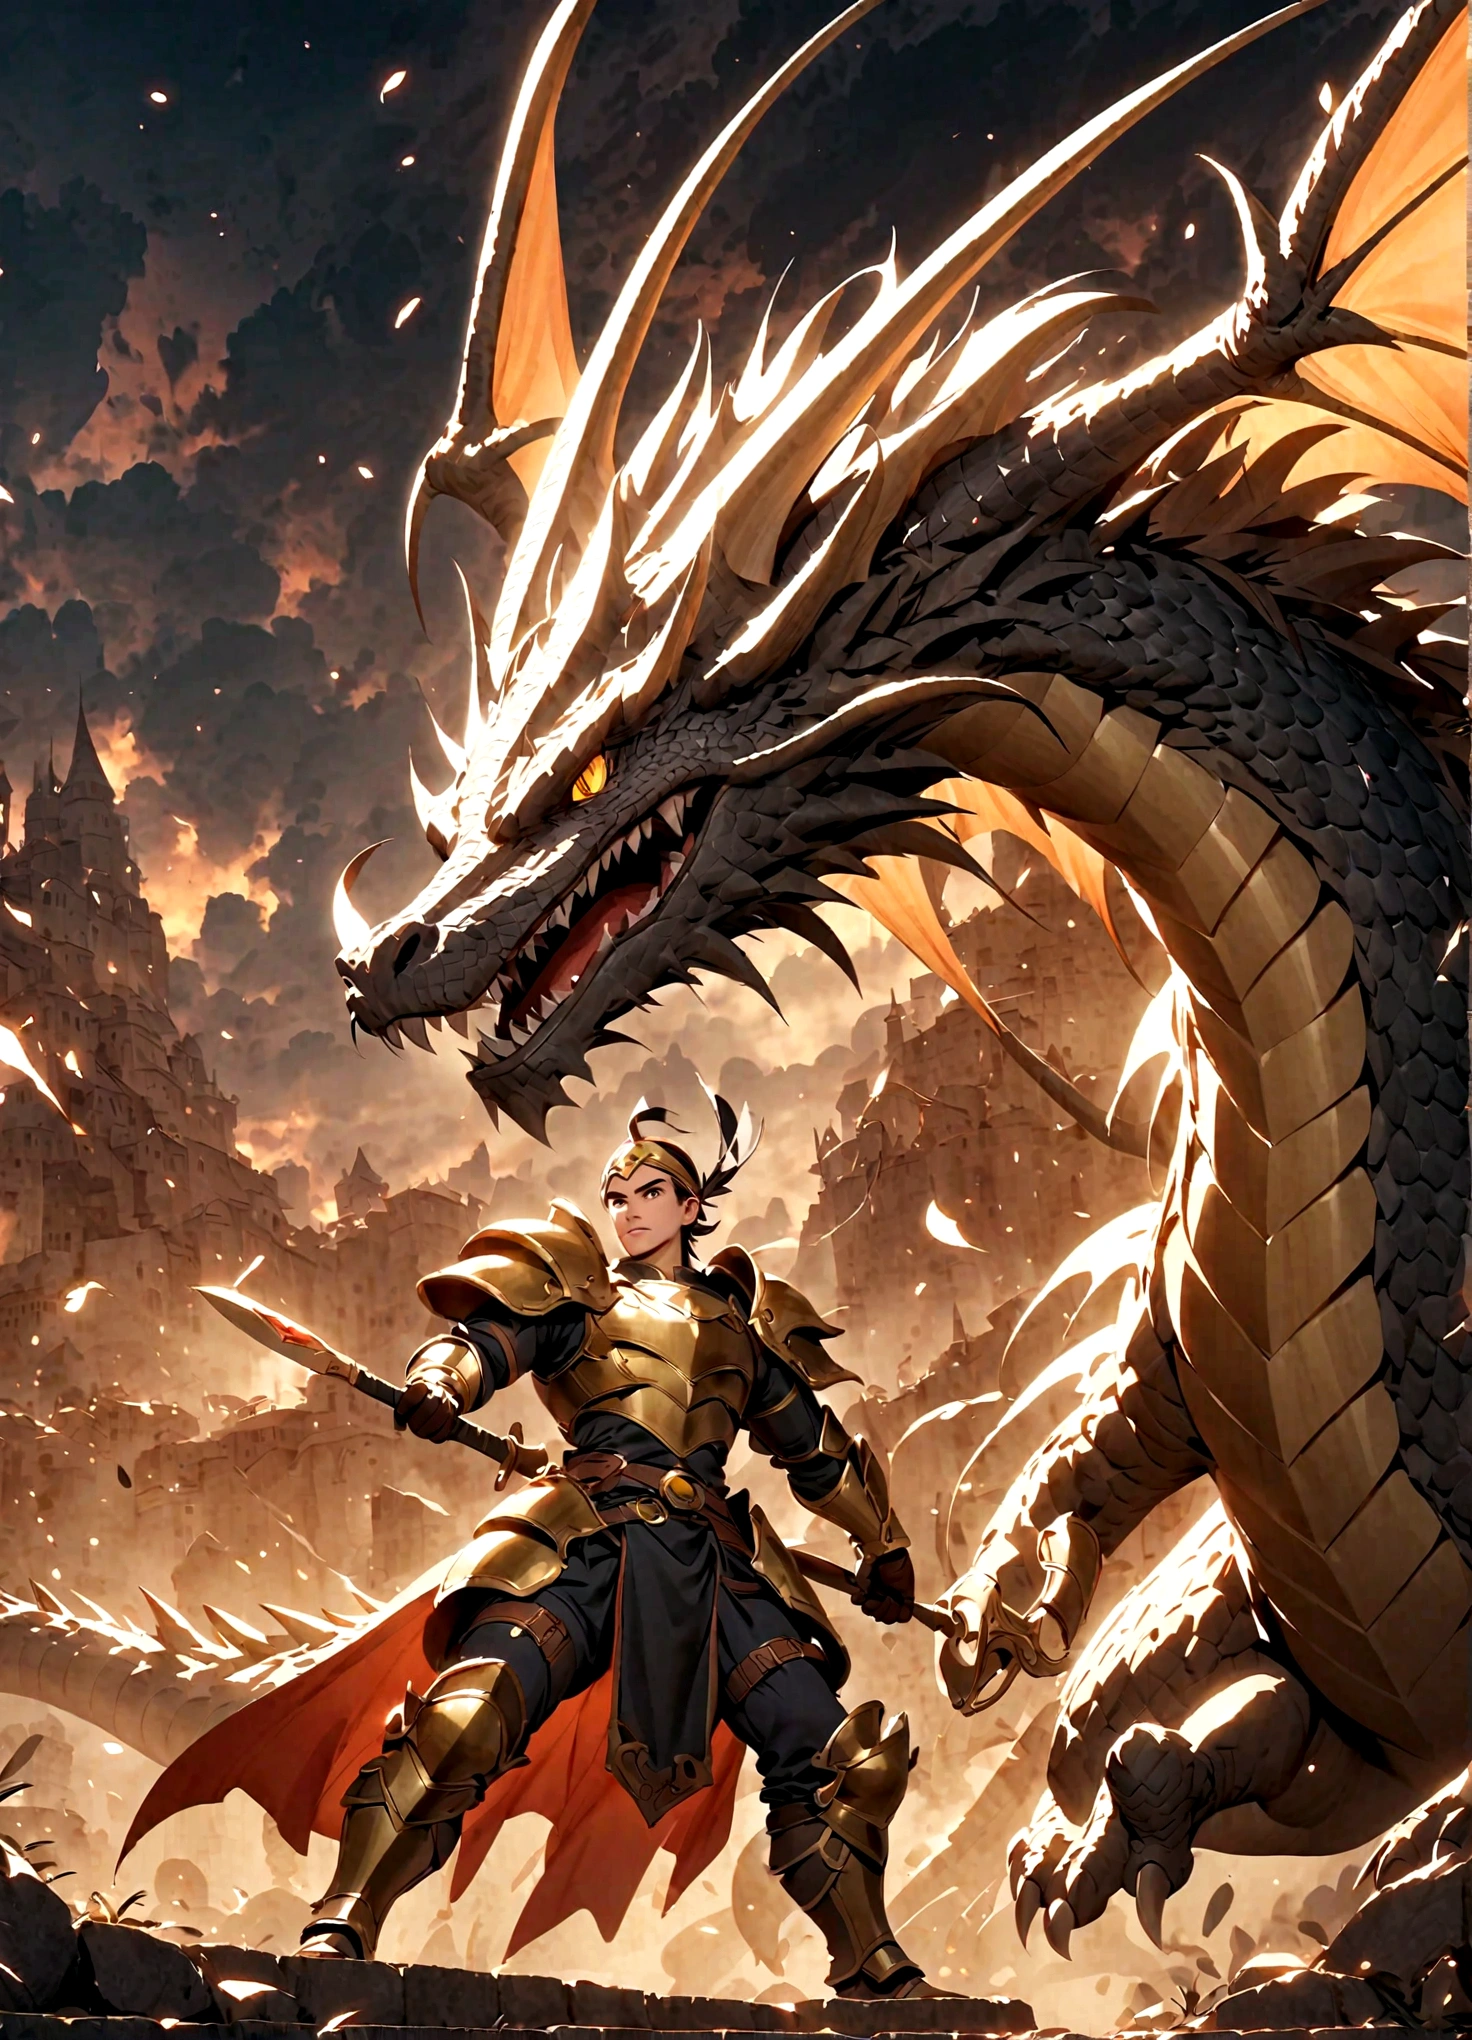 Dragon Quest: The Adventure of Dai，The Brave Day，Gold headband，armor，Carrying a sword，Behind him stood a dragon rider